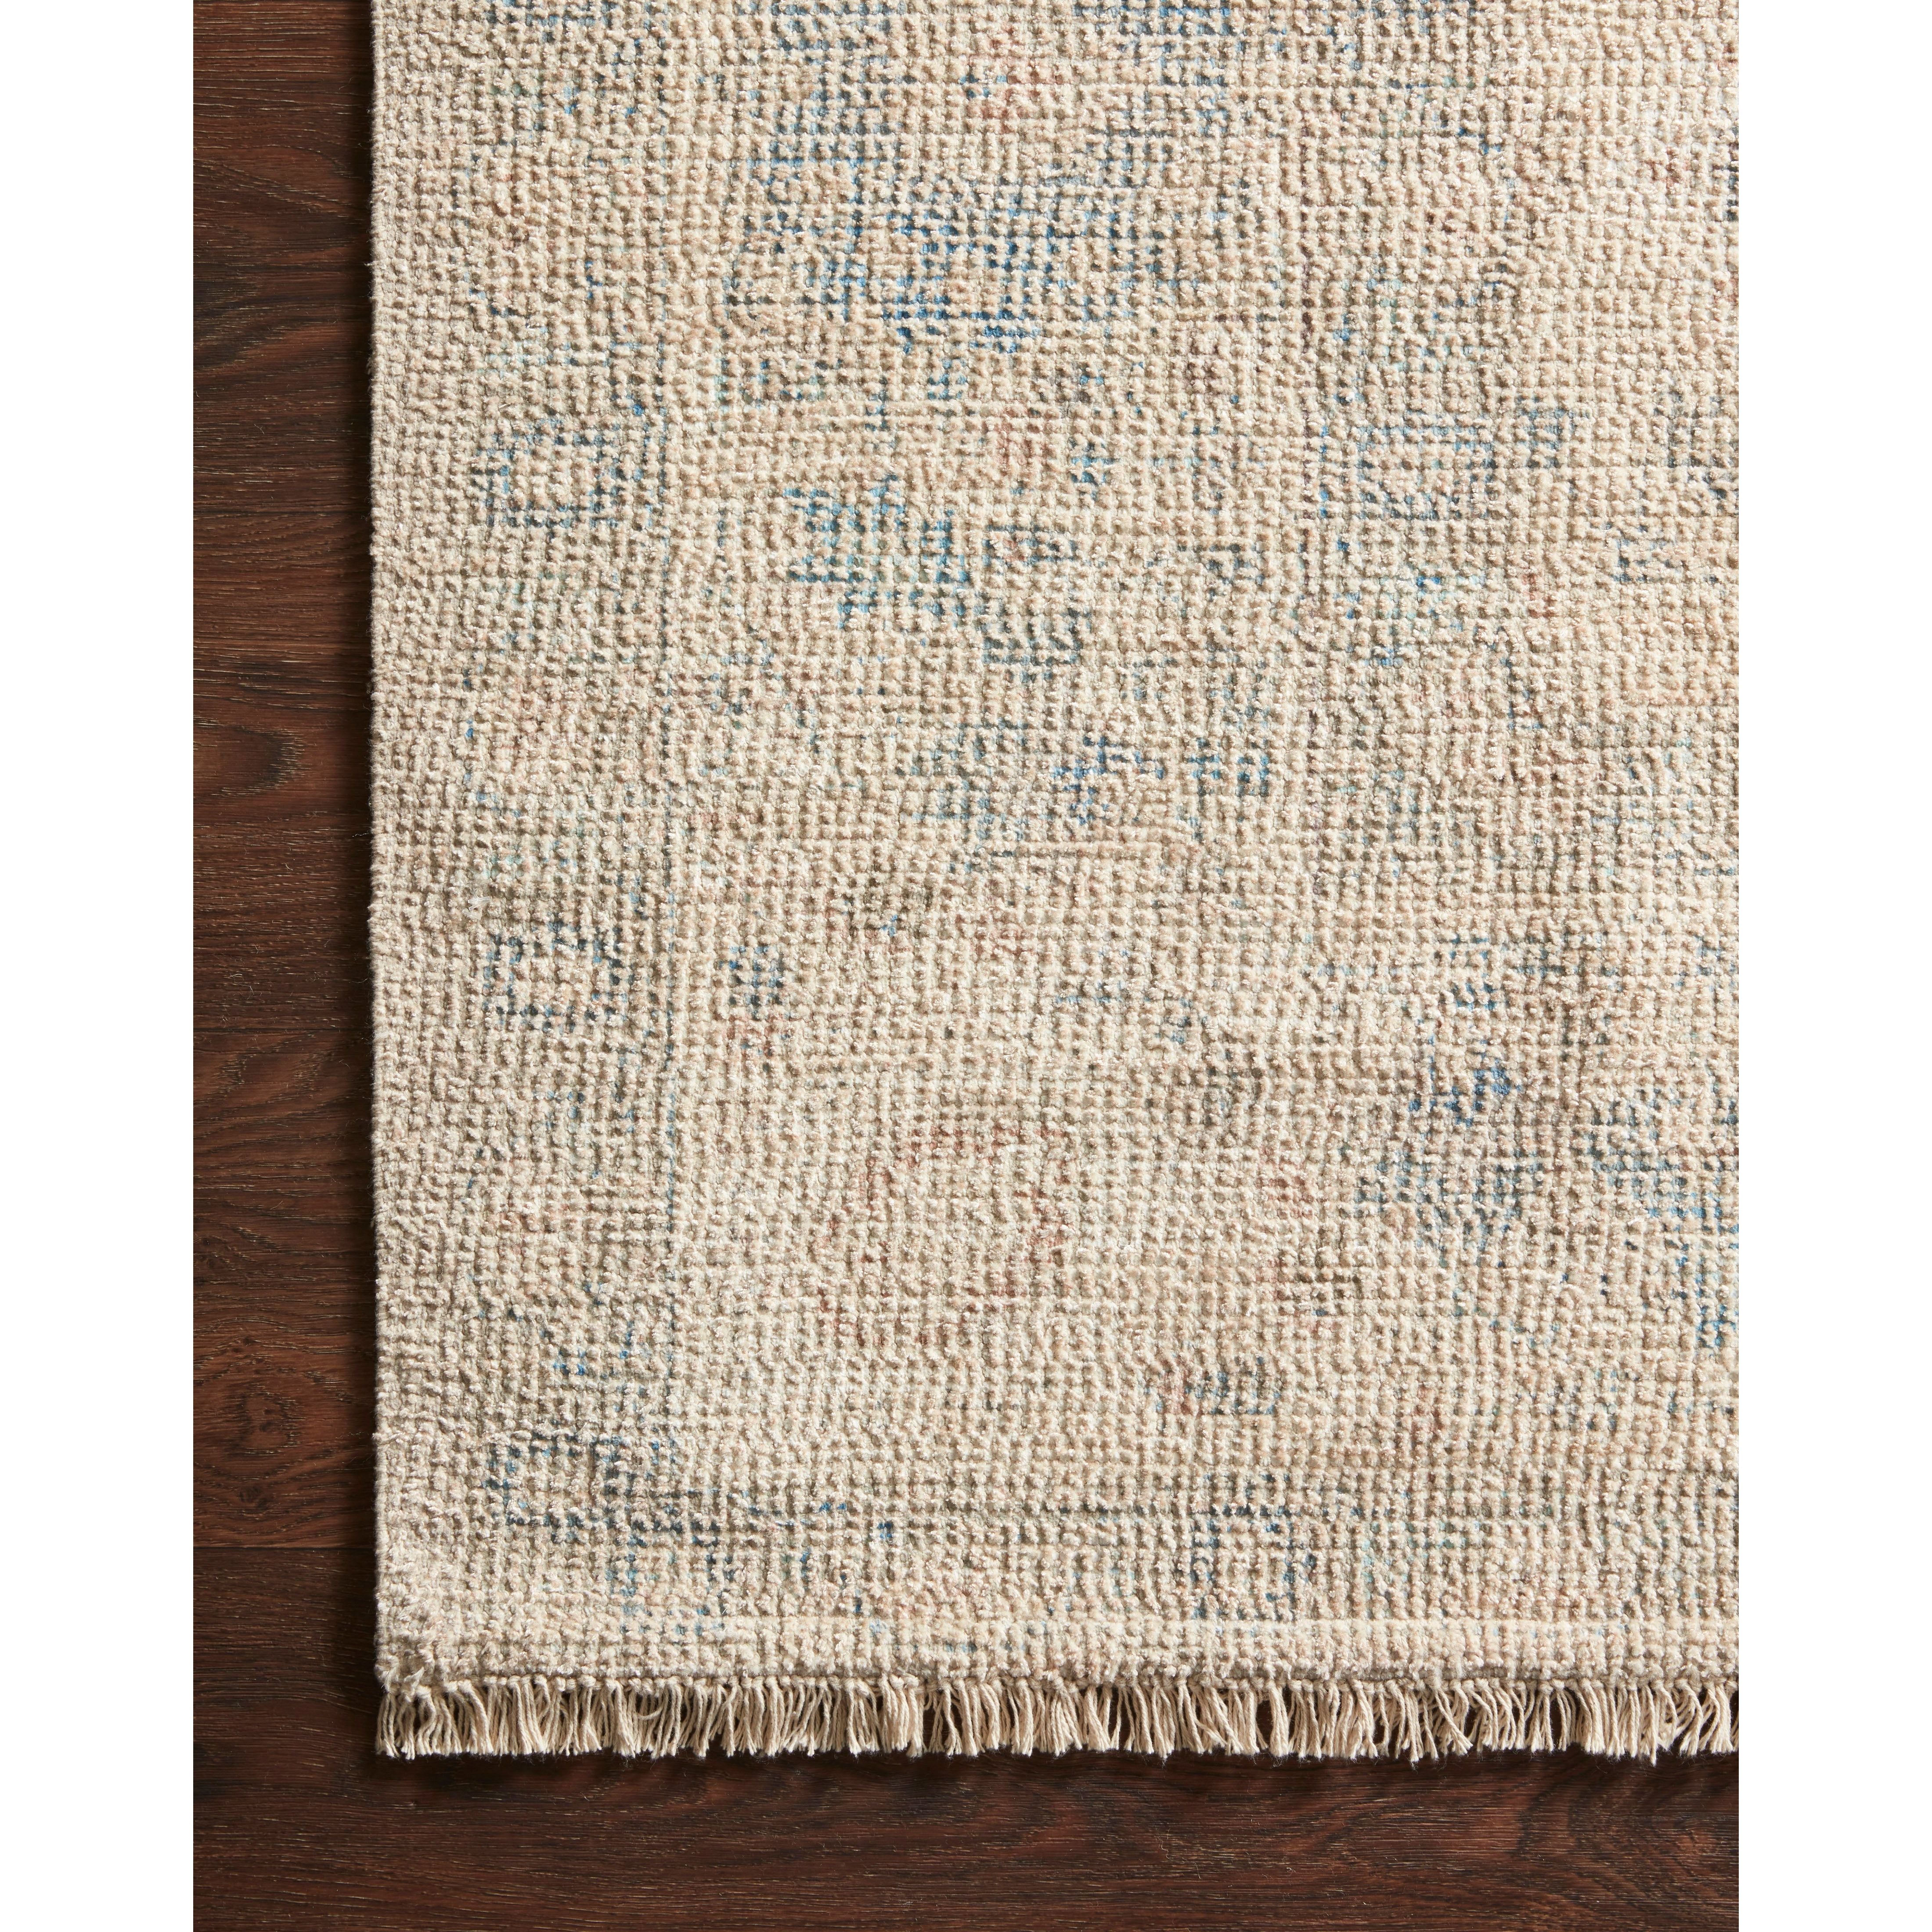 Hand-woven by skilled artisans, the Priya Natural / Blue Area Rug from Loloi offers beautiful tonal designs accentuated by a carefully curated color palette in tones of beige, blue, and brown. Delicate yet strong, the Priya is blended with wool, cotton, and more and an instant classic made for today's home.